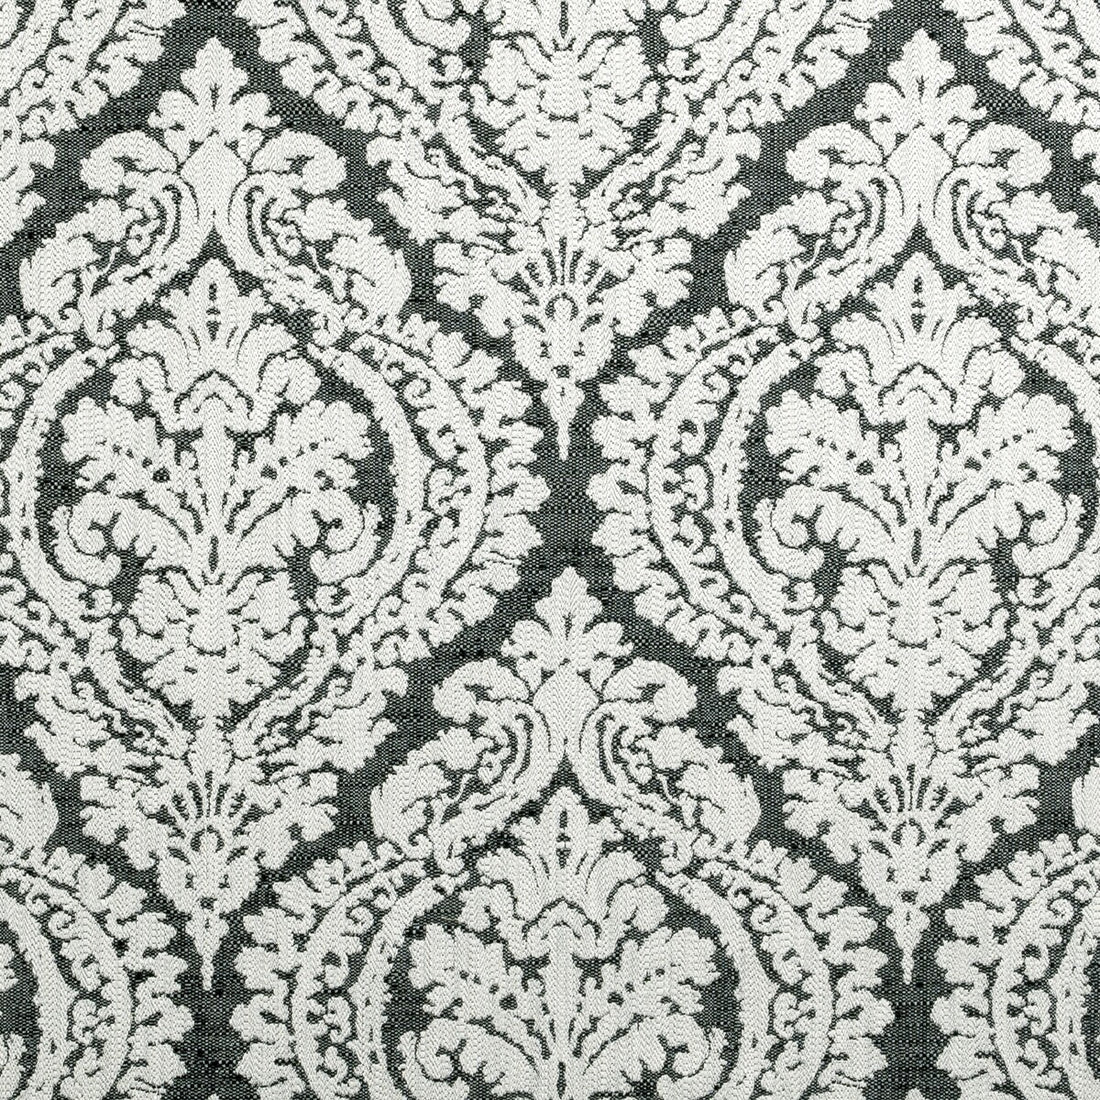 Bw1004 fabric in black/white color - pattern F0876/01.CAC.0 - by Clarke And Clarke in the Clarke &amp; Clarke Black + White collection